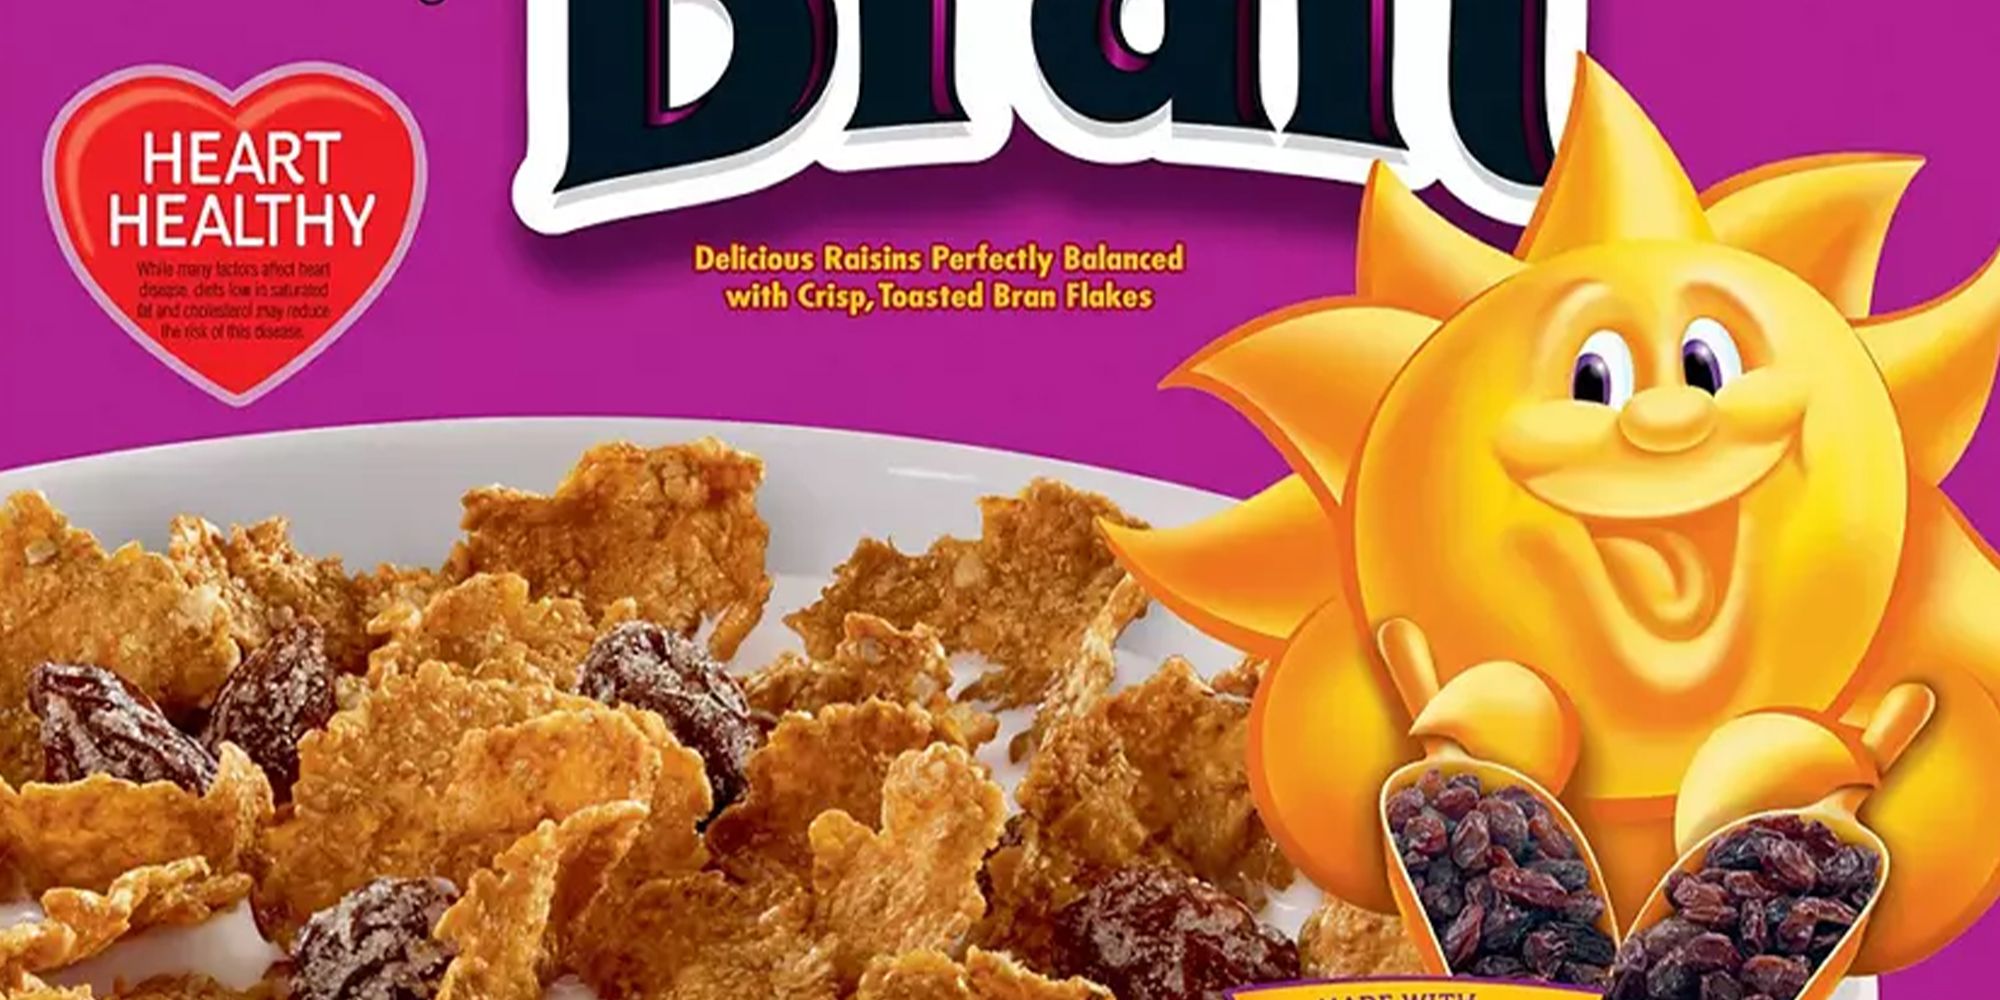 Sunny, an anthropomorphic sun, pours two scoops of raisins on a bowl of Raisin Bran cereal.